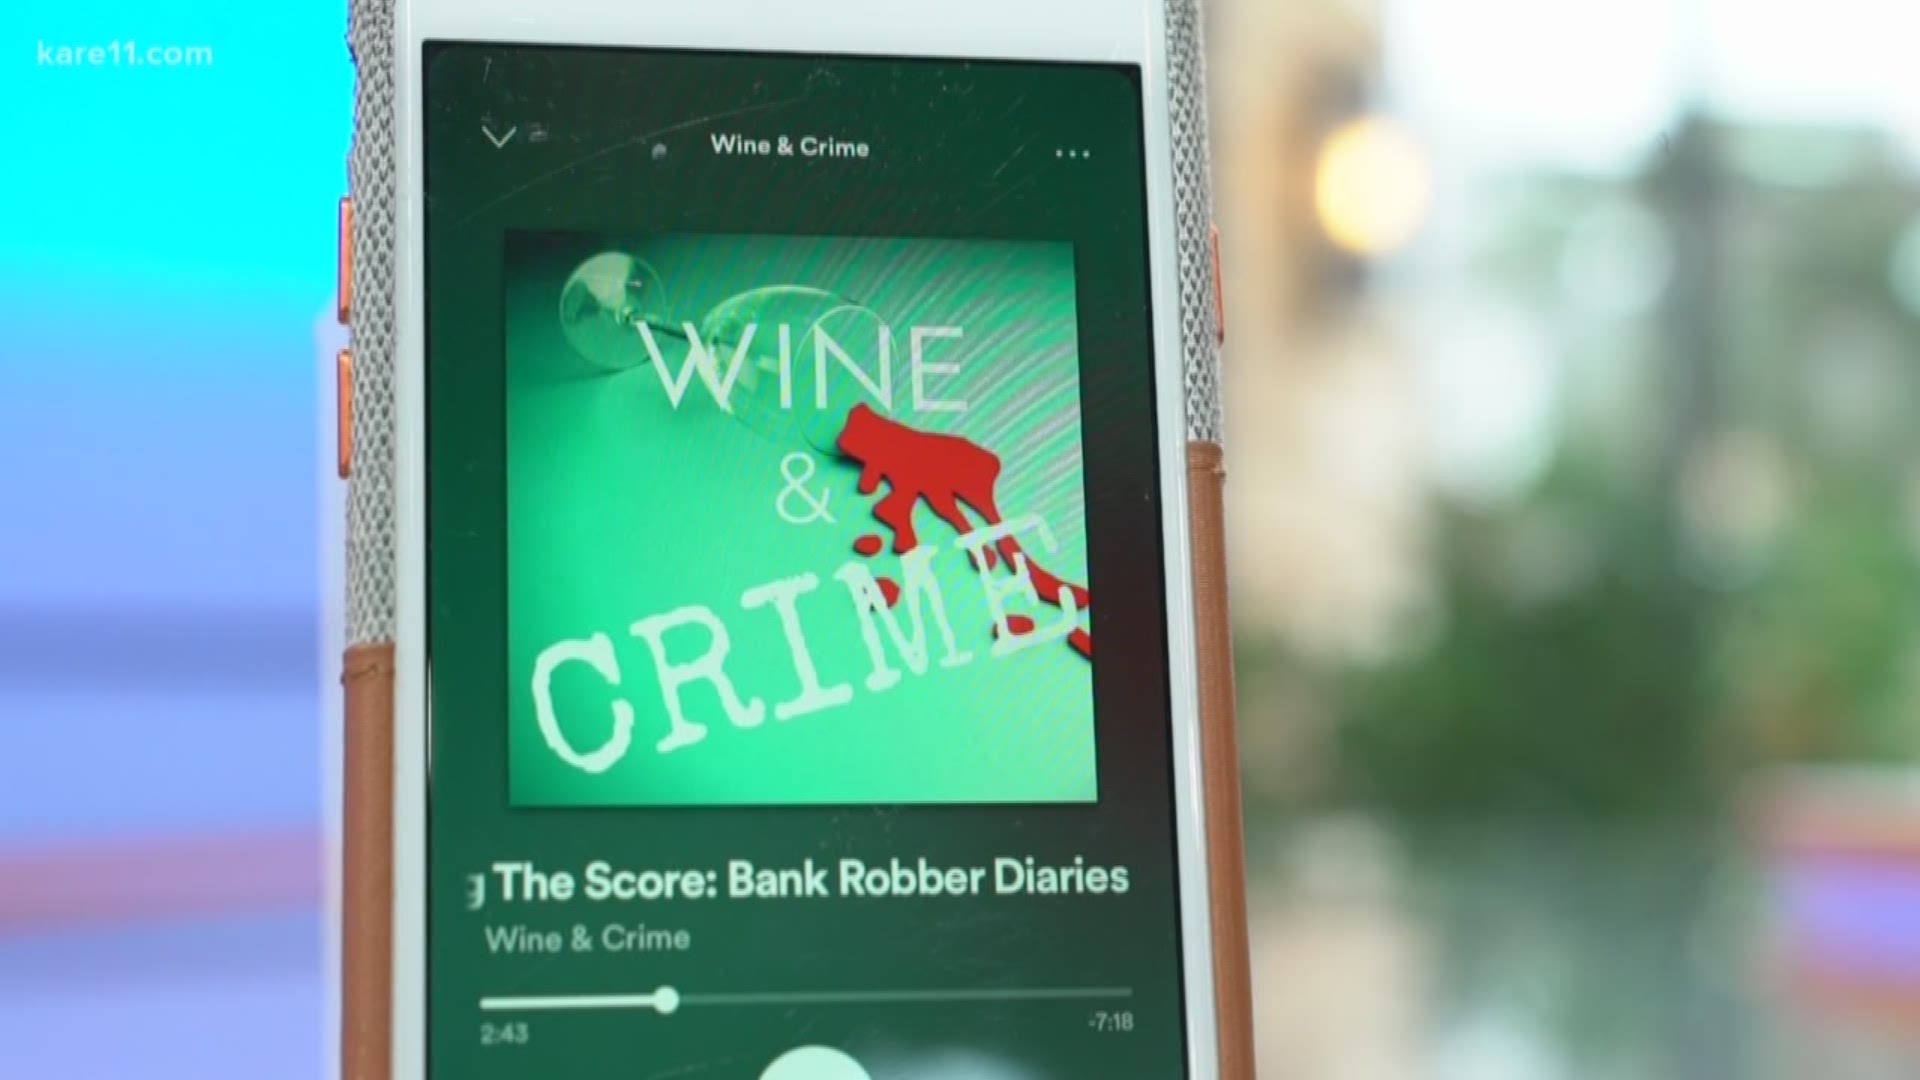 Amanda Jacobson, Wine & Crime co-host, talks about the podcast's growing popularity.